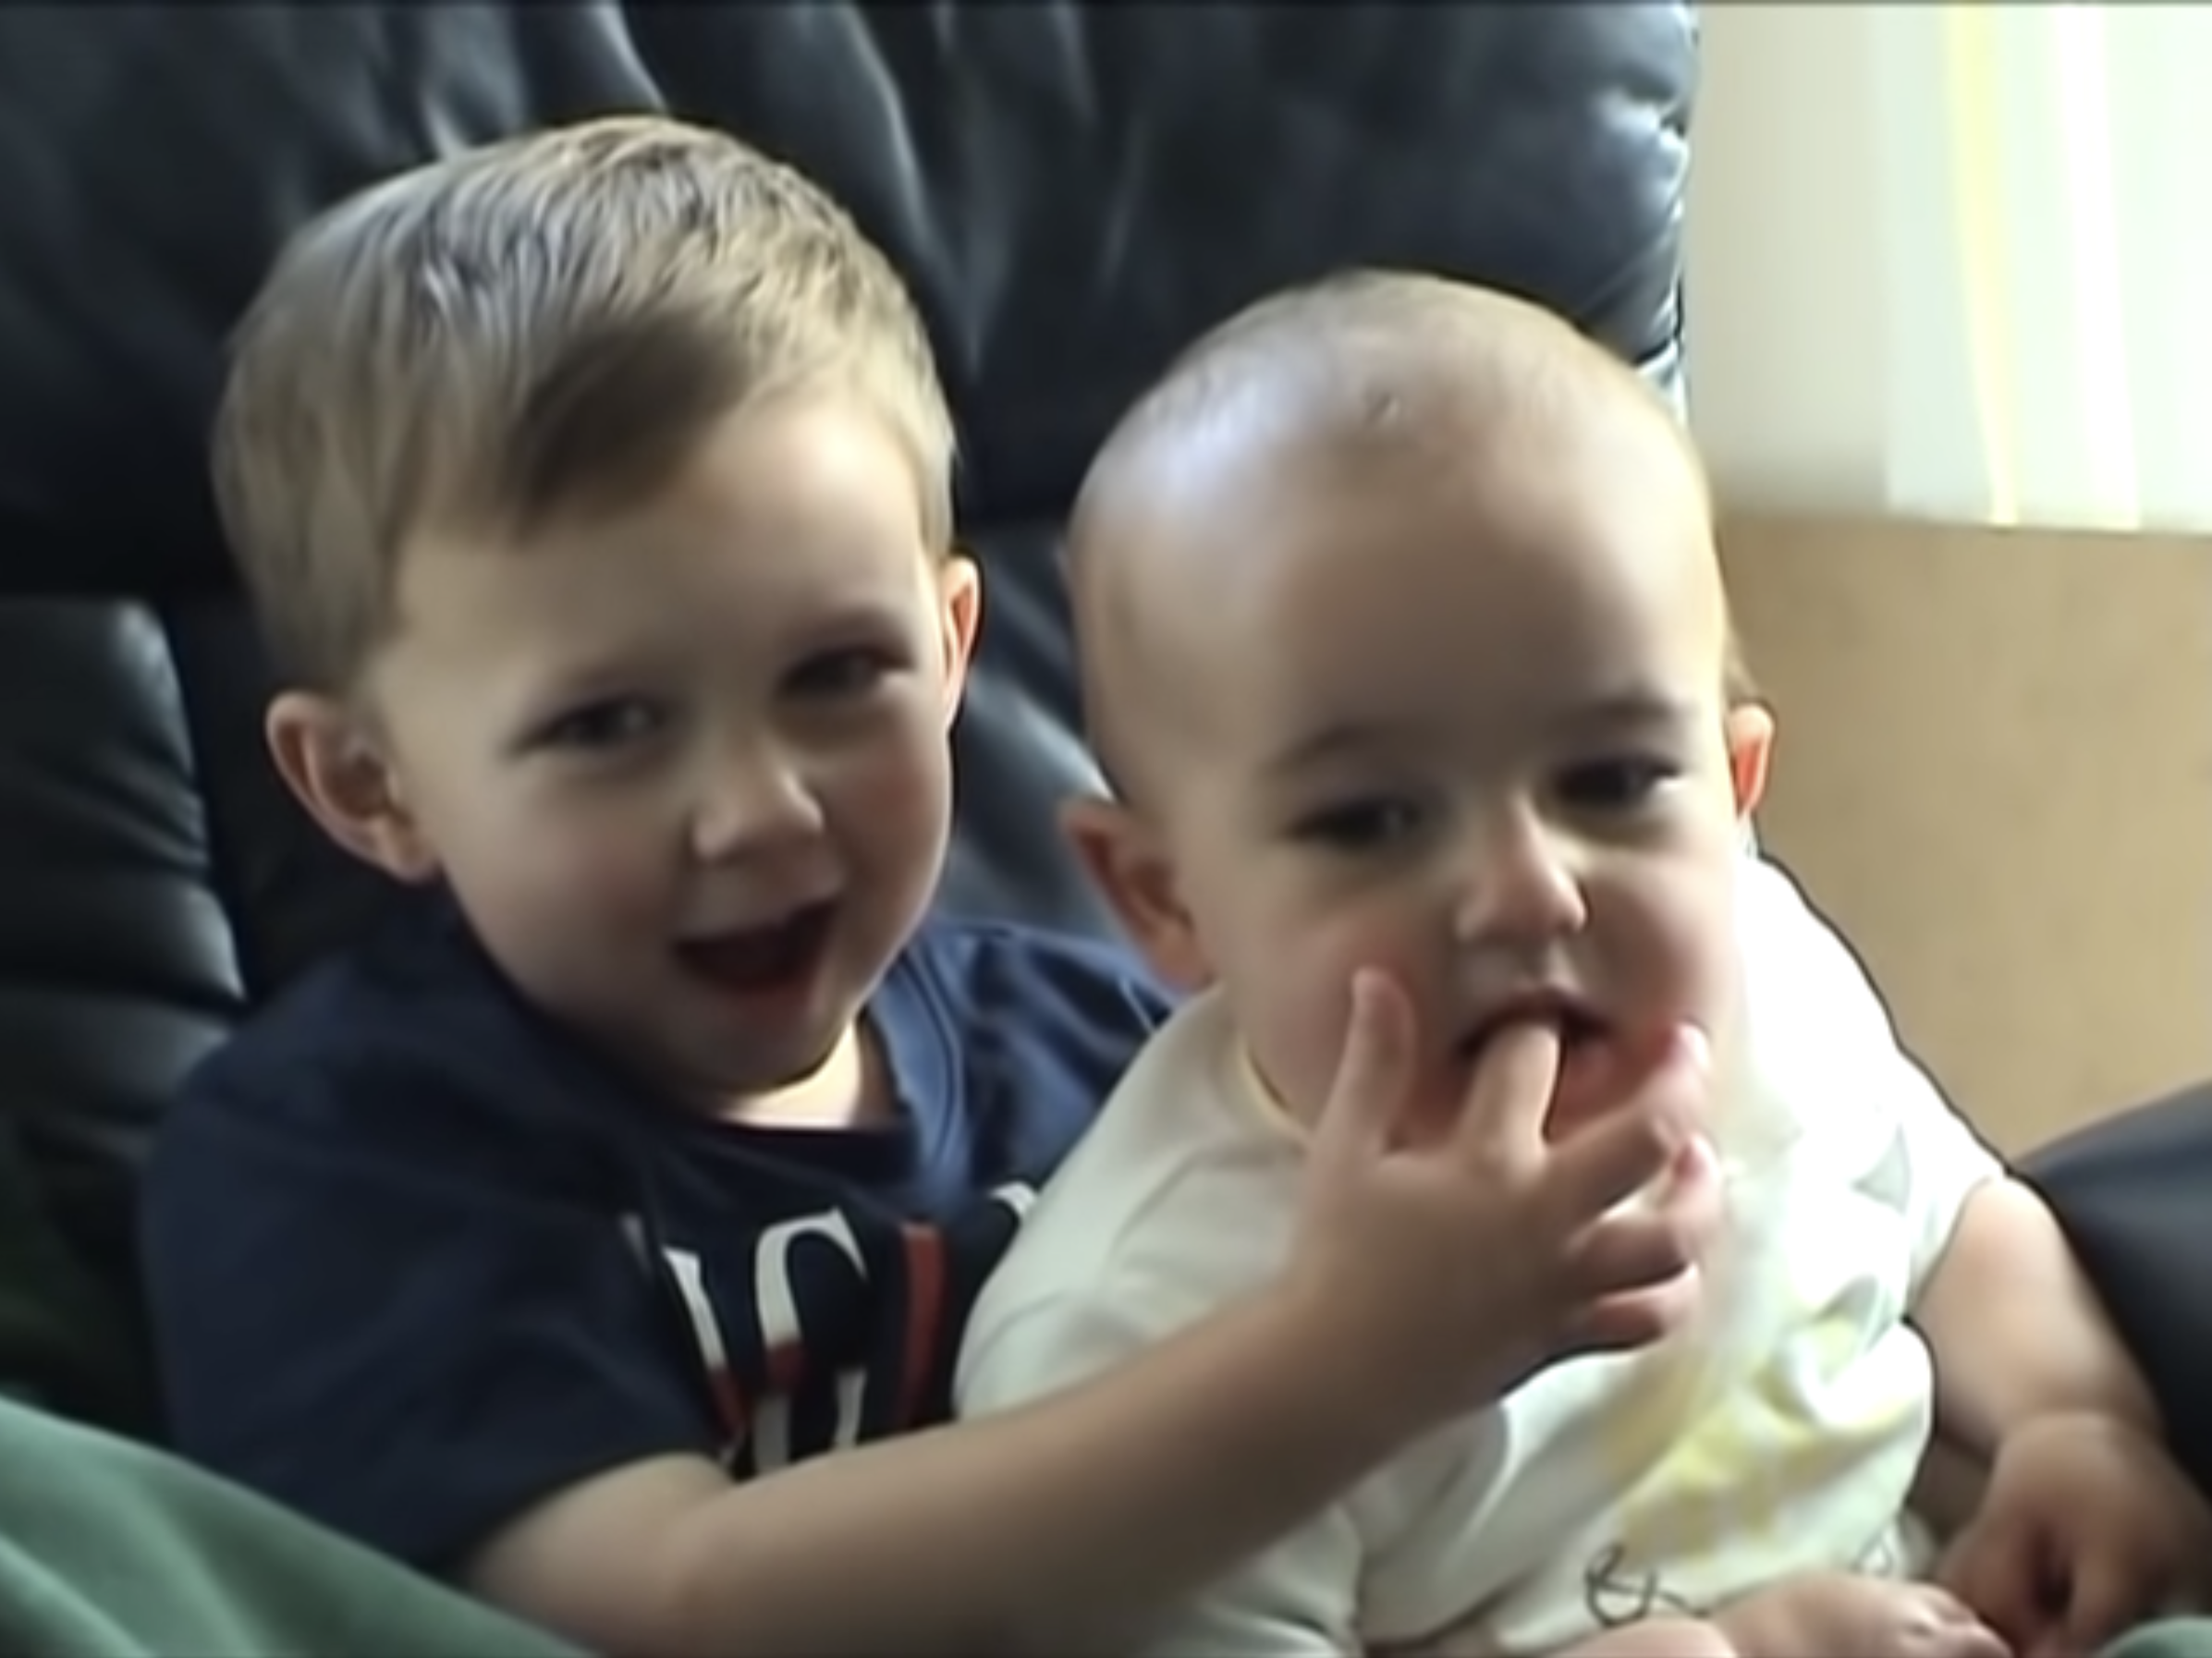 Screenshot from the "Charlie Bit My Finger" video